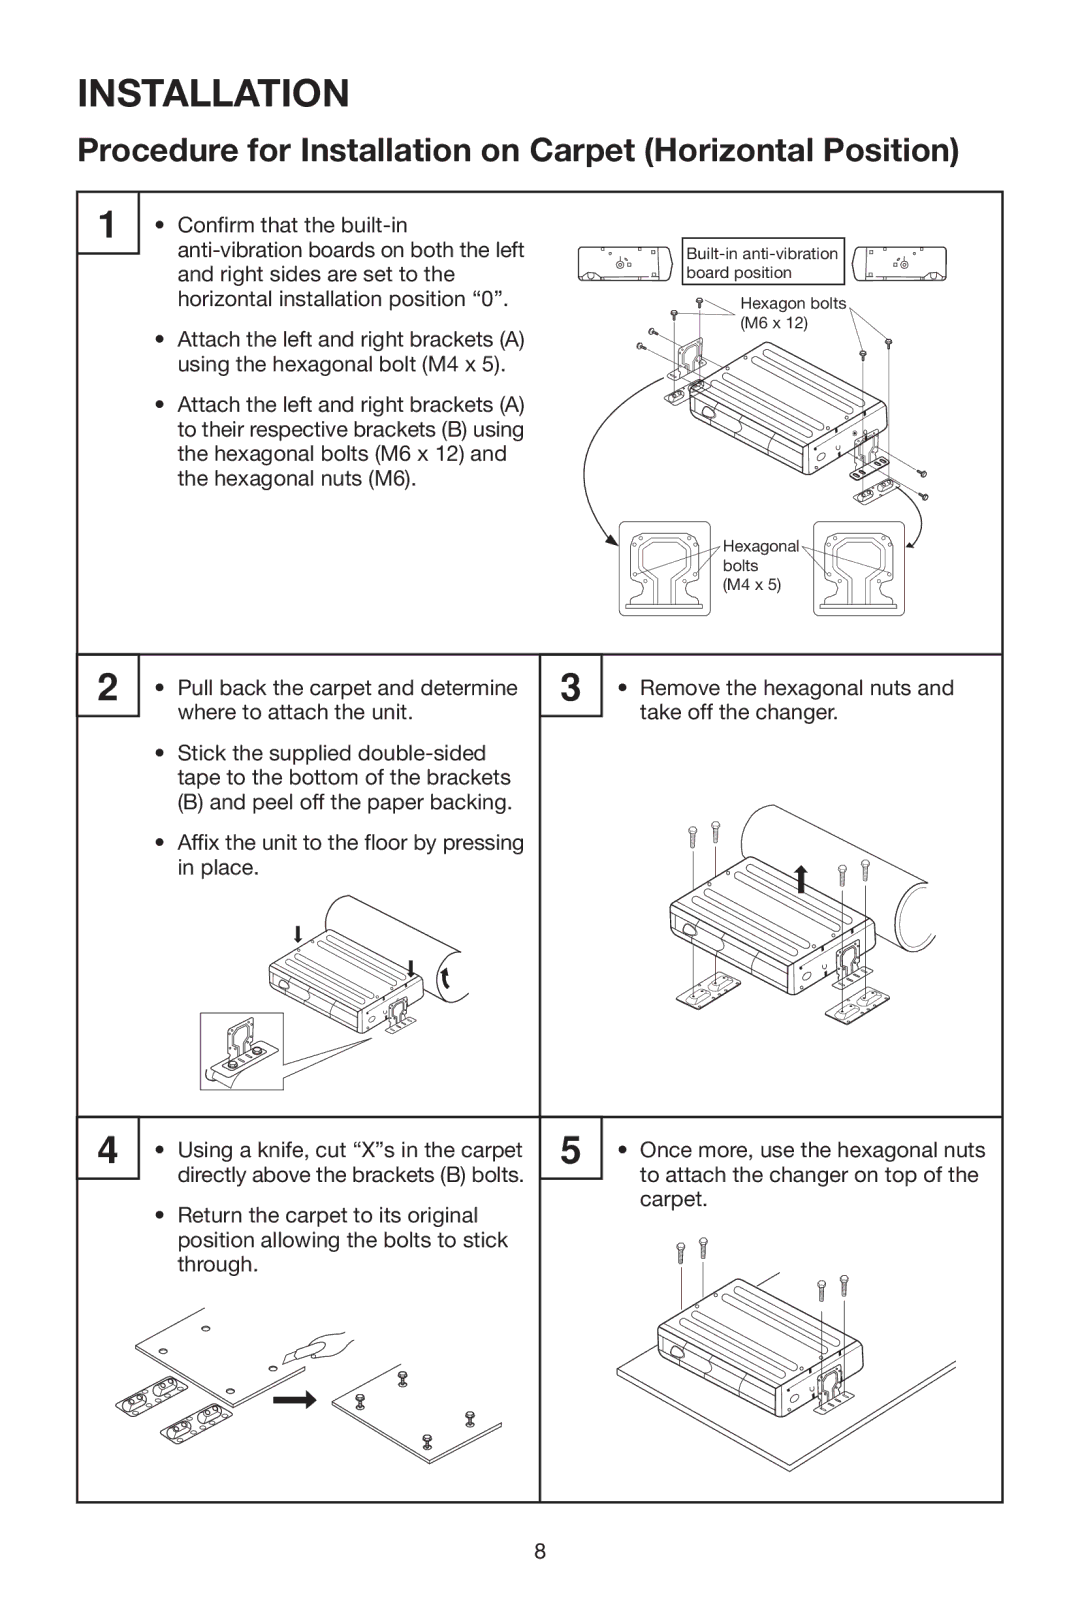 PYLE Audio PLCD10CH manual Procedure for Installation on Carpet Horizontal Position 